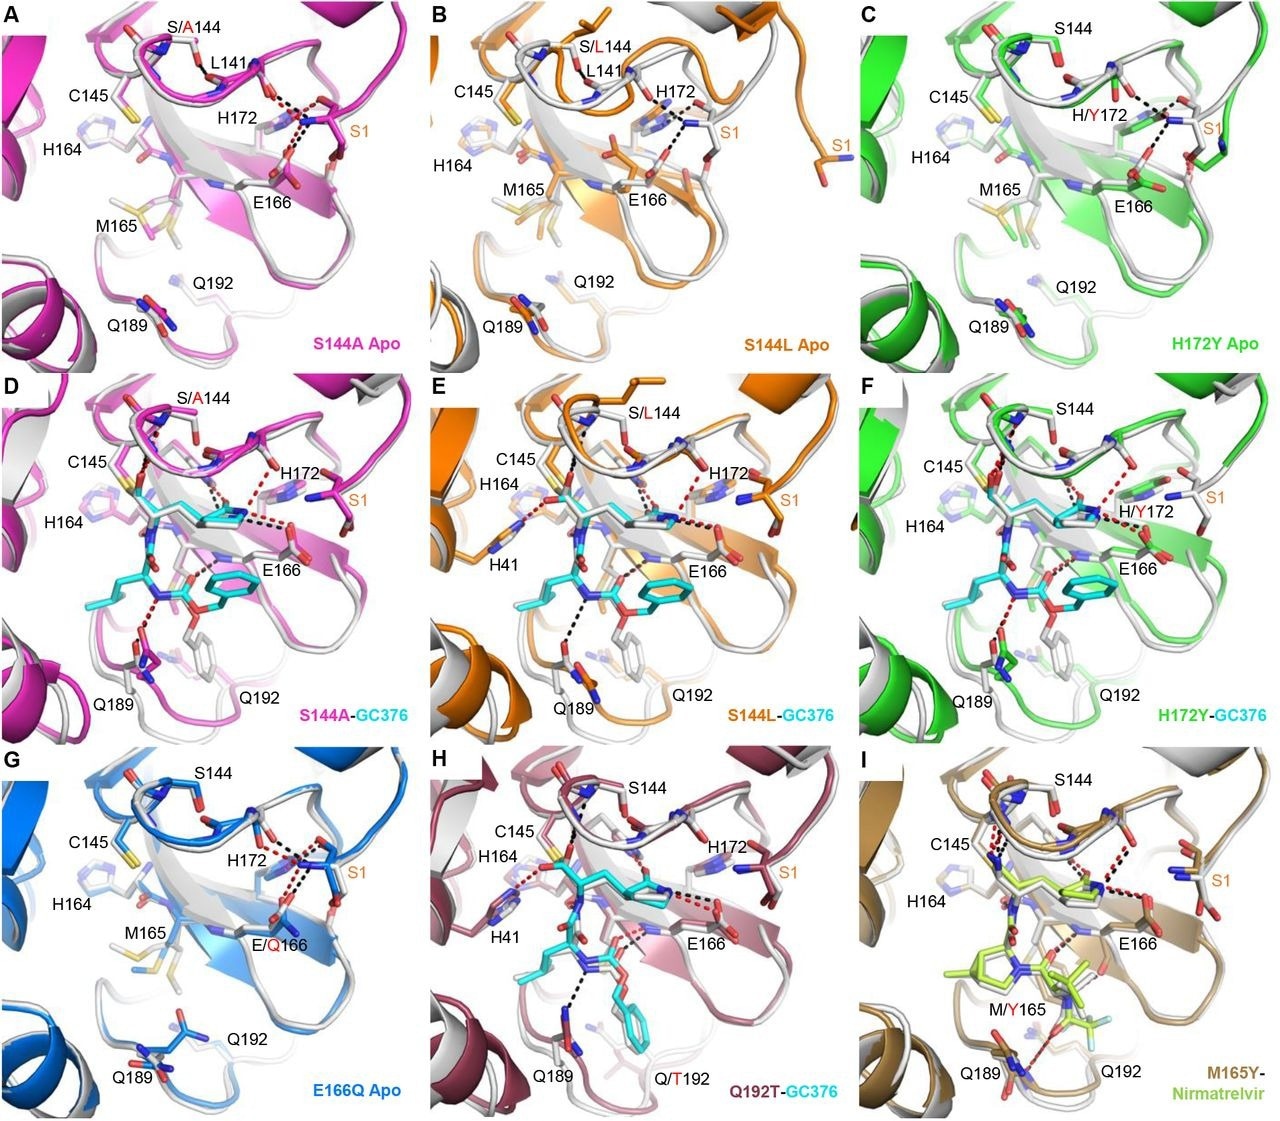 X-ray crystal structures of Mpro mutants. Each mutant structure is aligned with the corresponding WT structure shown in white (apo, PDB 7JP1; GC-376 complex, 6WTT; nirmatrelvir complex, 7RFW). For the mutant structures, GC-376 and nirmatrelvir are shown in cyan and neon green respectively. WT HBs are shown as black dashes for selected residues at the mutation sites or between the protein and inhibitor. Mutant HBs are shown as red dashes. Mutations are indicated with red text. S1 residue from the N-terminus of the adjacent protomer is labeled in orange. The side chain of L141 is not shown. (A) Apo Mpro S144A (magenta, PDB 8D4L). (B) Apo Mpro S144L (orange, PDB 8DFE). The view for panel B is shifted slightly to show for the movement of the adjacent N-terminus. (C) Apo Mpro H172Y (green, PDB 8D4J). (D) Mpro S144A GC-376 complex (magenta, PDB 8D4M). (E) Mpro S144L GC-376 complex (orange, PDB 8DD9). (F) Mpro H172Y GC-376 complex (green, PDB 8D4K). S1 residue is disordered. (G) Apo Mpro E166Q (blue, PDB 8D4N). (H) Mpro Q192T GC376 complex (mauve, PDB 8DGB). (I) Mpro M165Y Nirmatrelvir complex (brown, PDB 8DCZ).